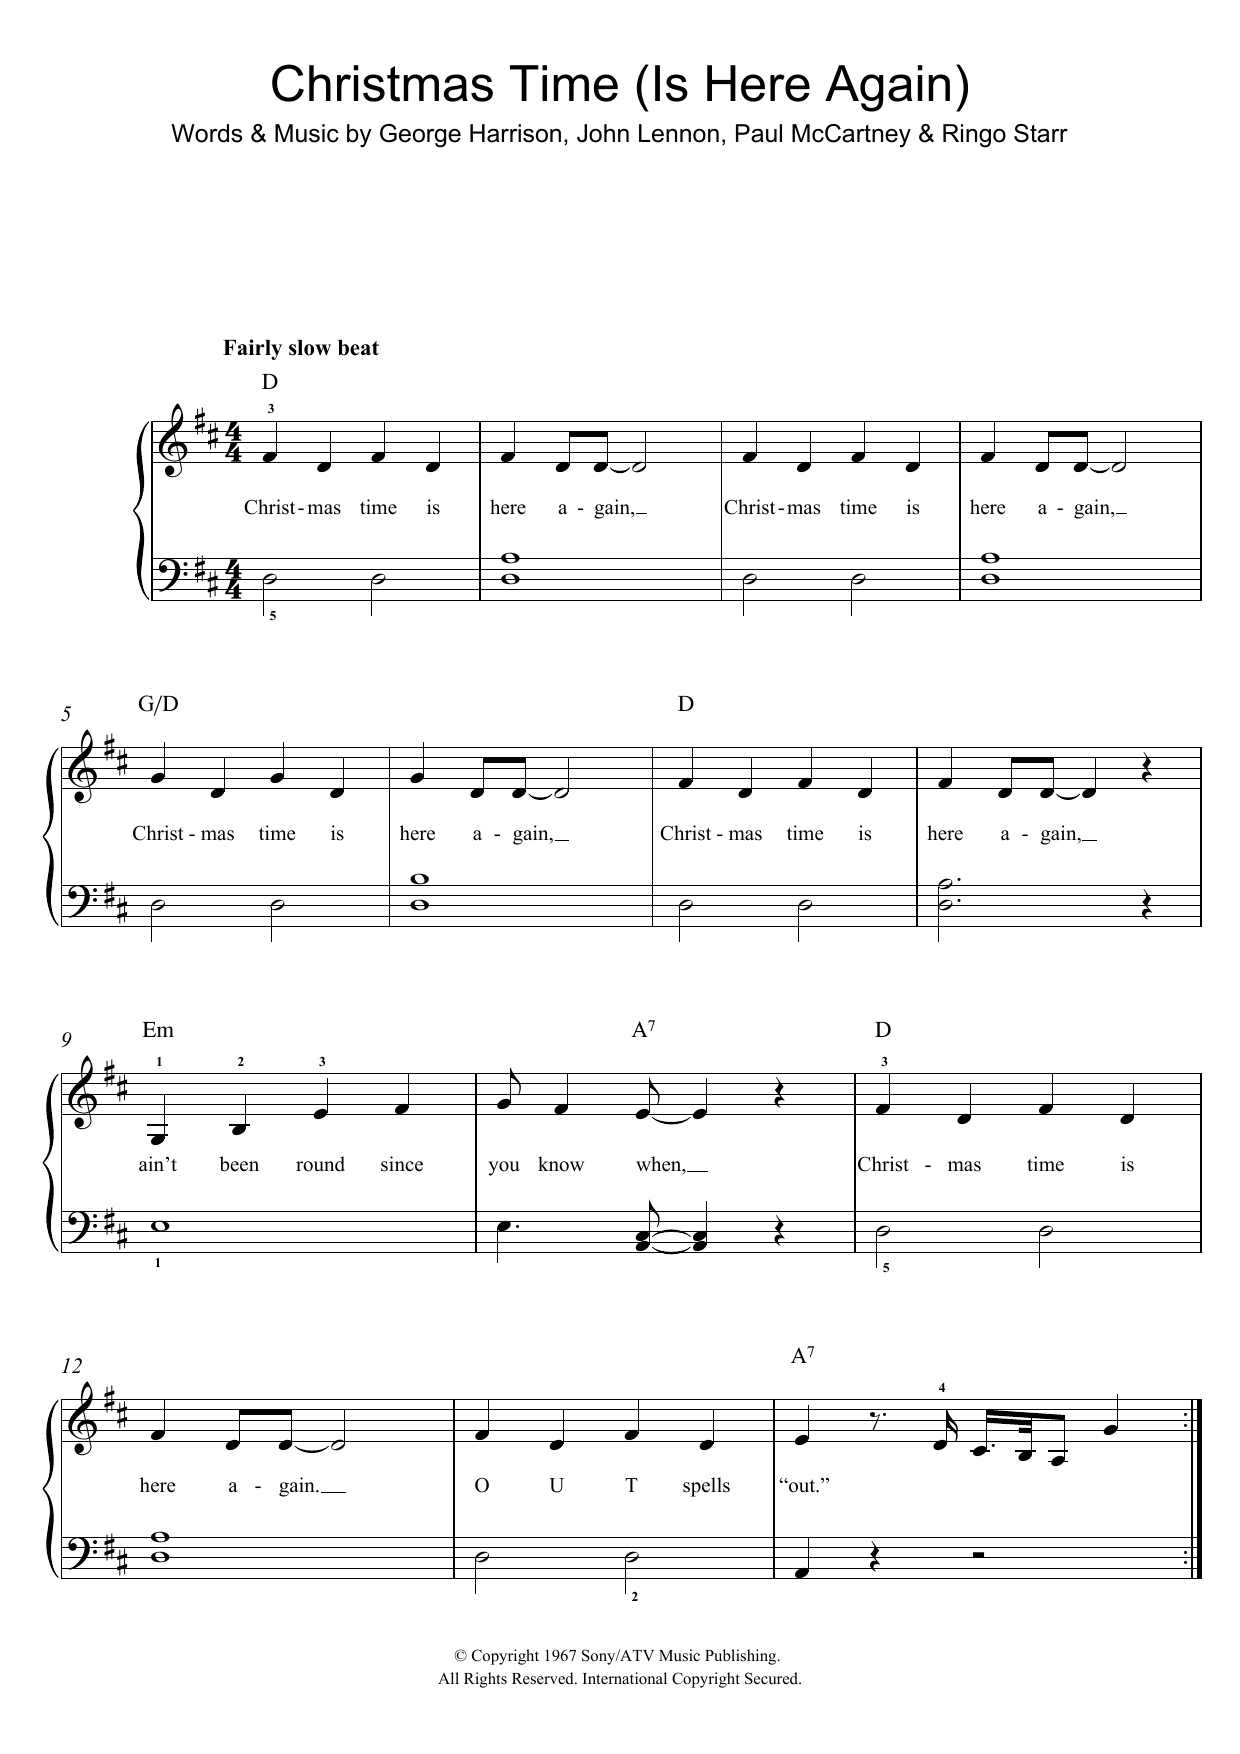 Download The Beatles Christmas Time (Is Here Again) Sheet Music